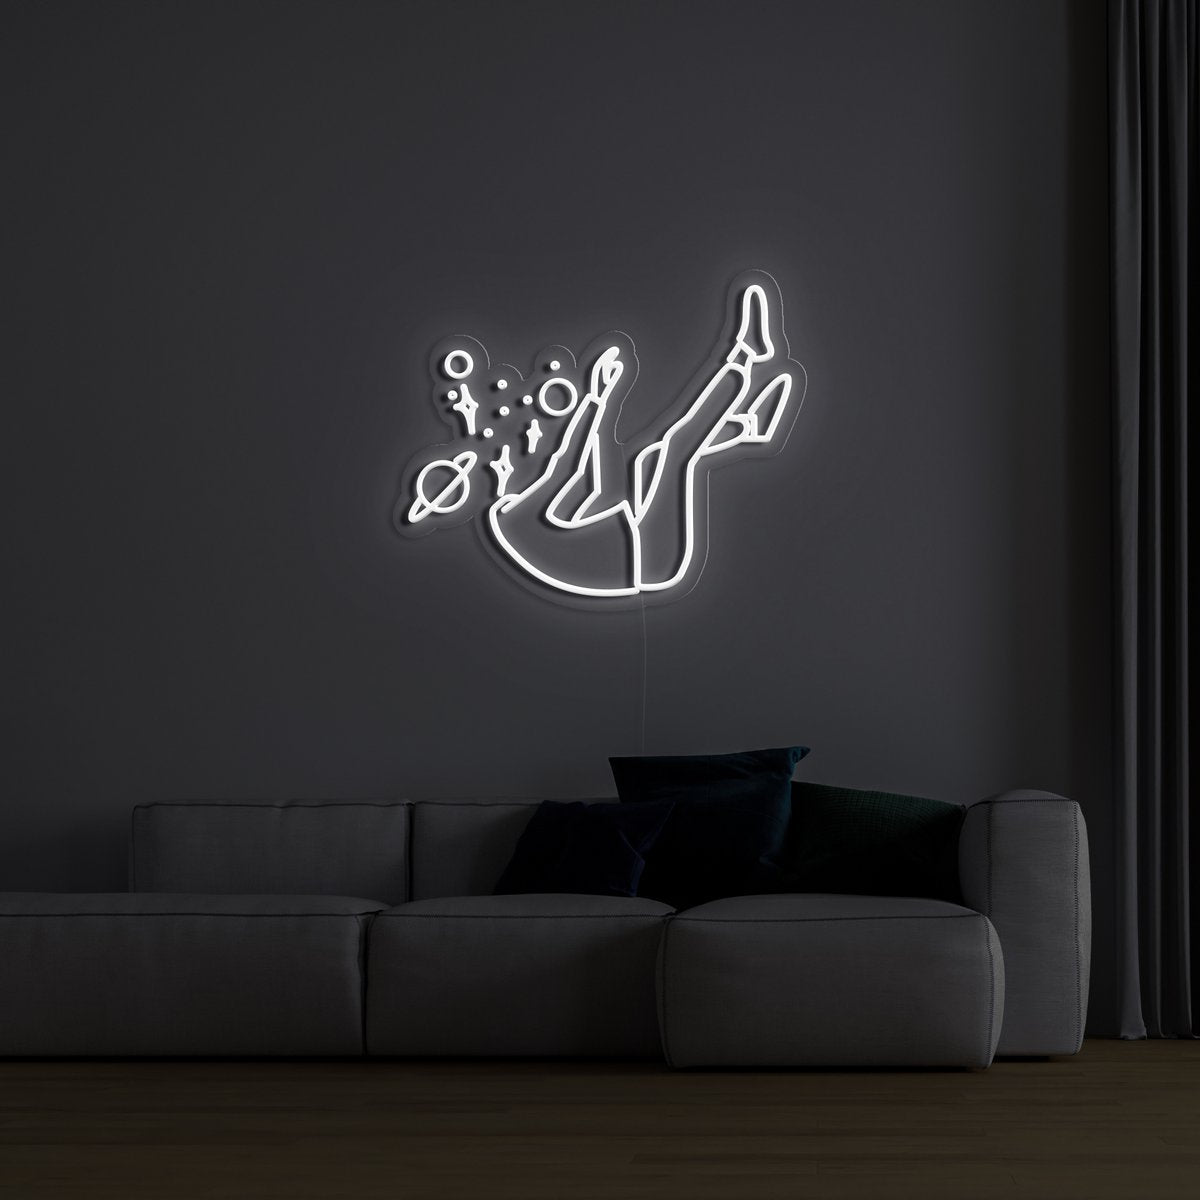 'Falling' LED Neon Sign